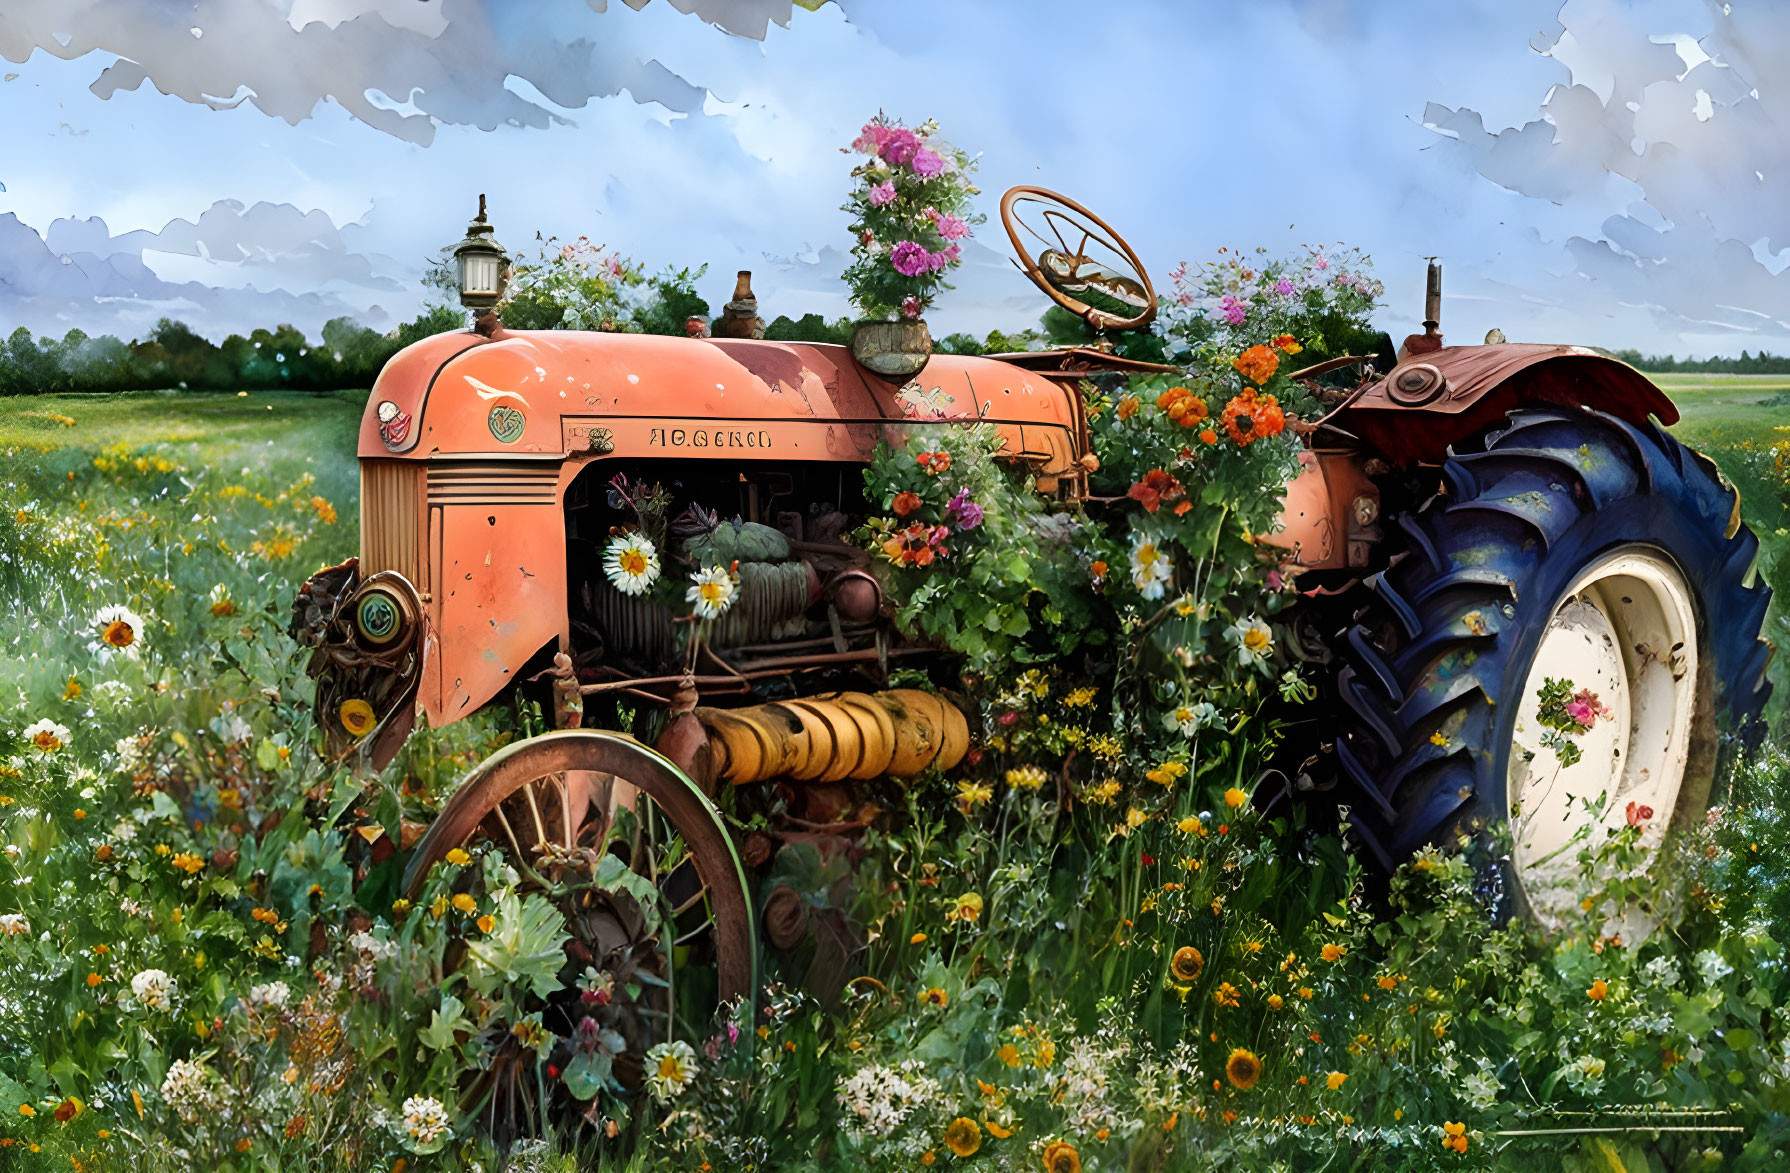 Vintage orange tractor with flower adornments in blooming field under blue sky.